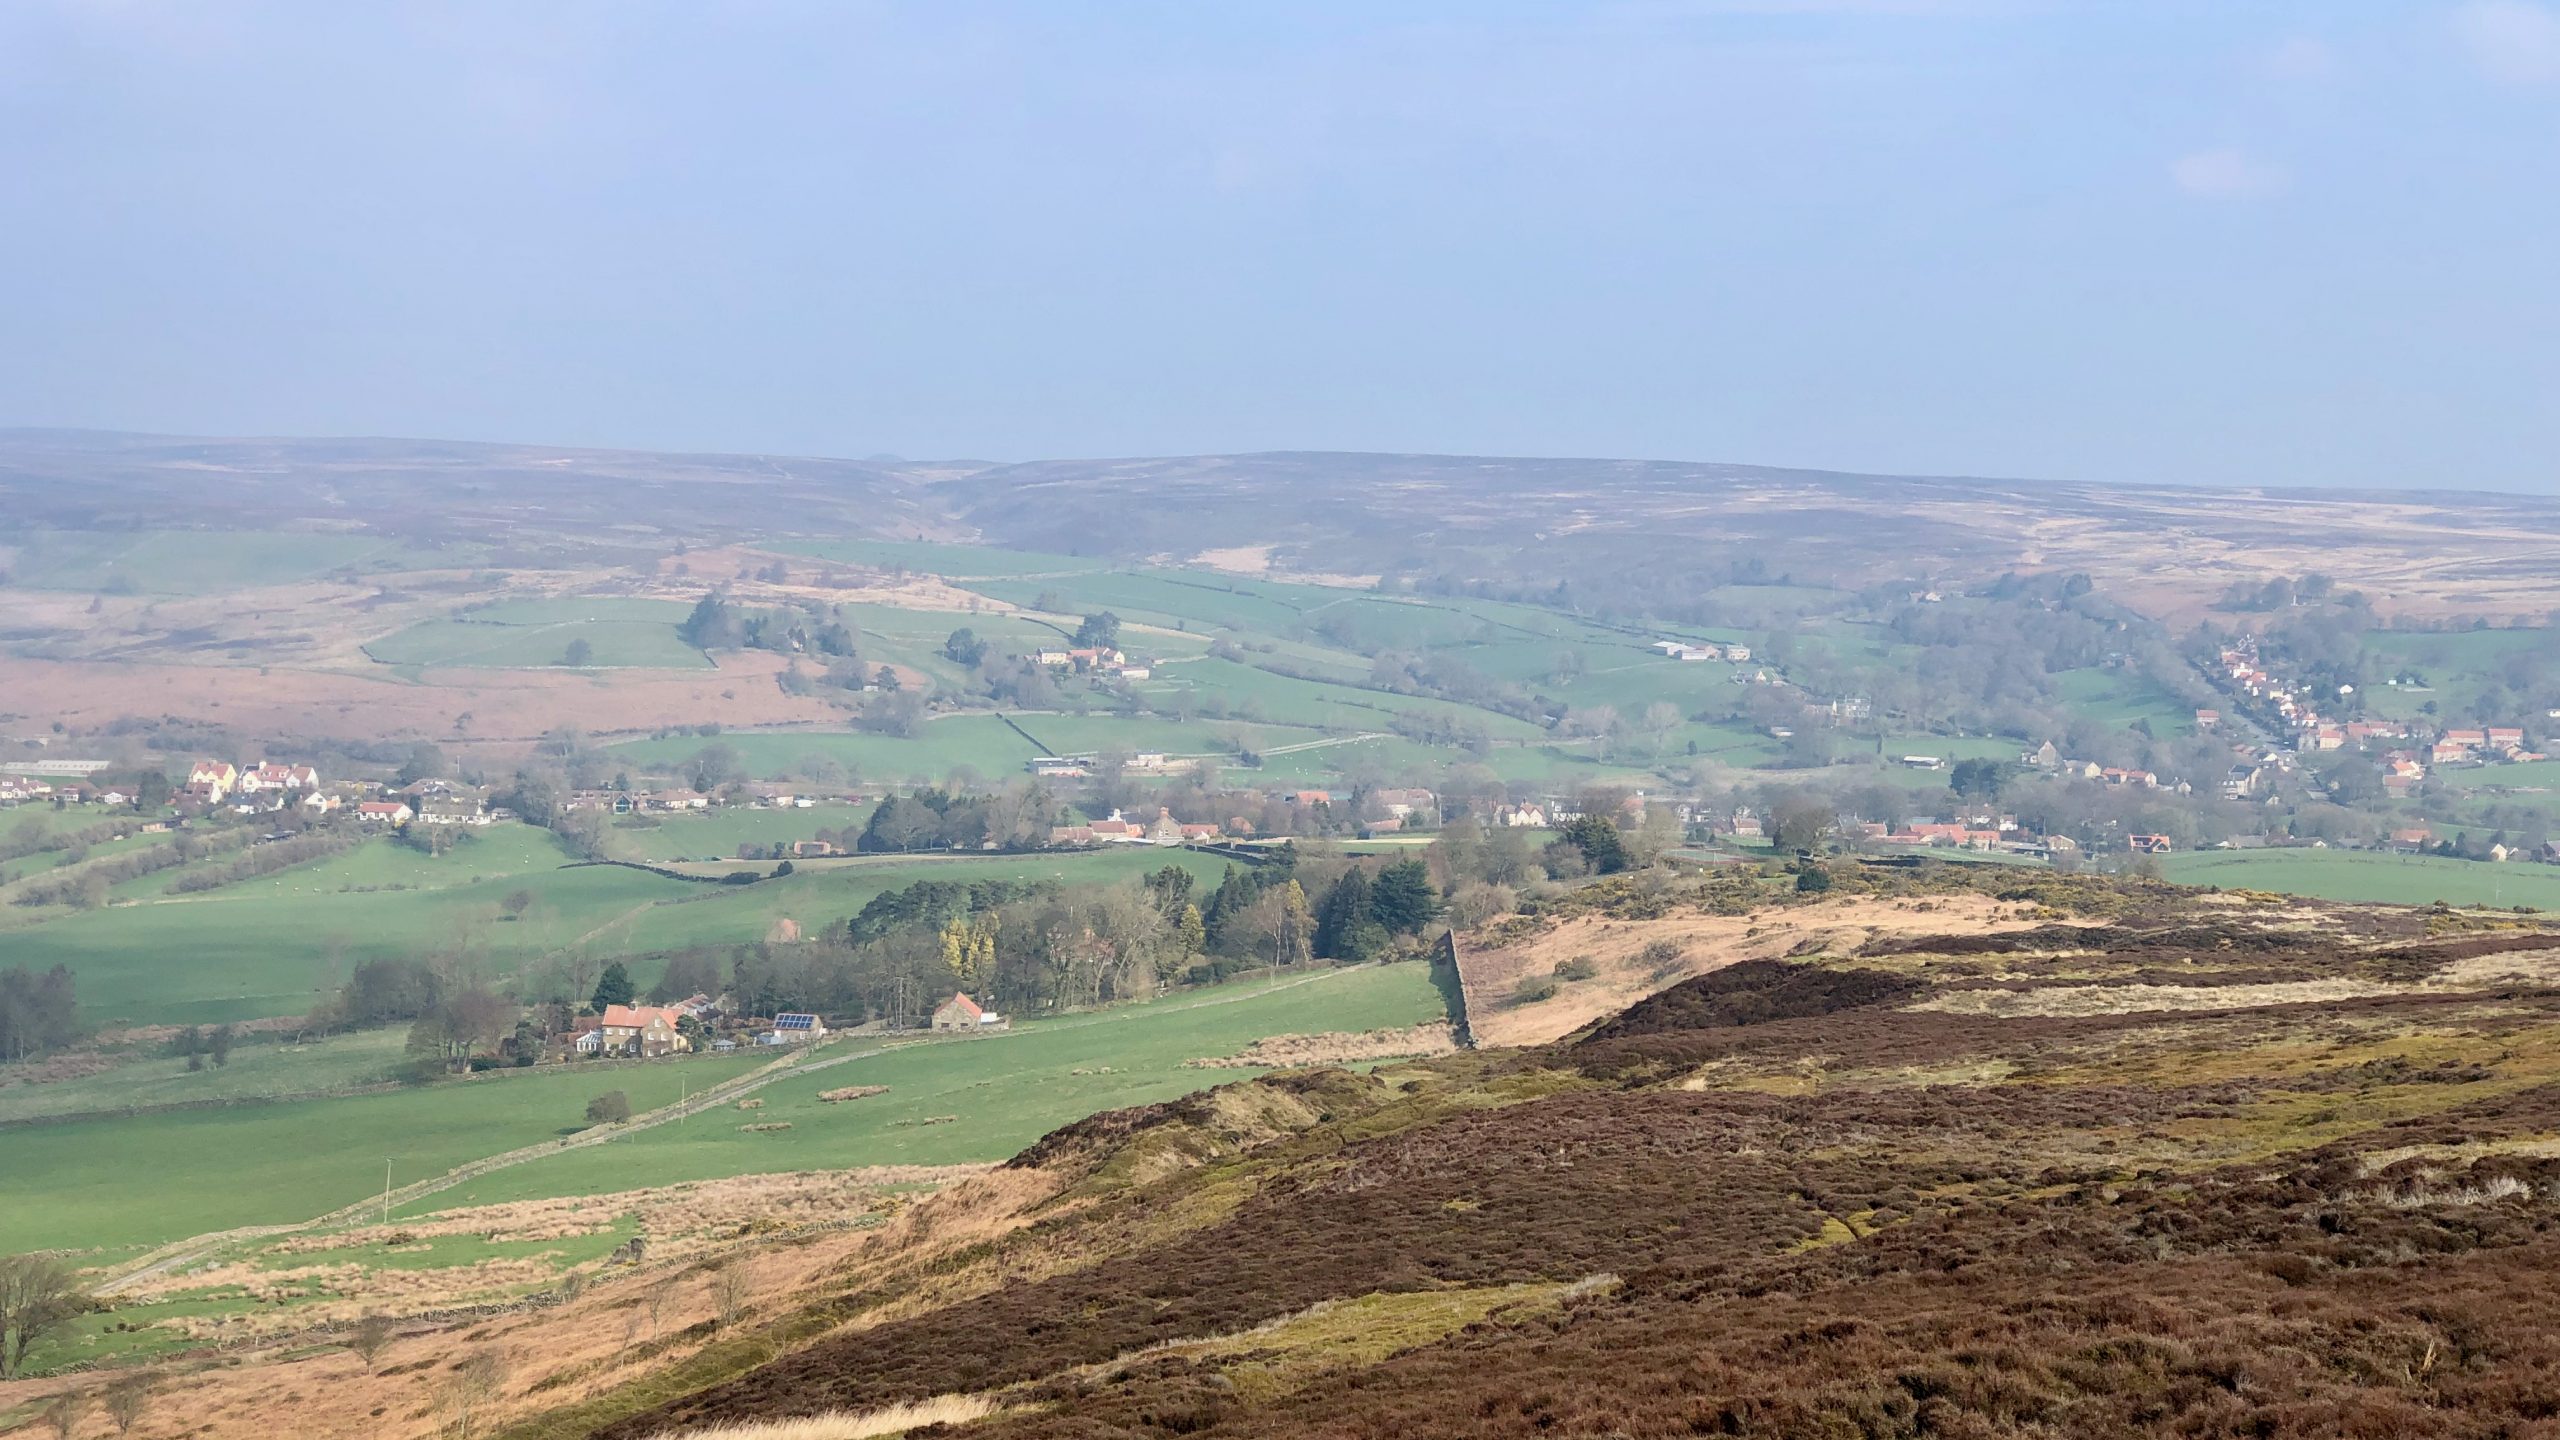 A view looking north along Ainthorpe Rigg. in the distance is the village of Danby.